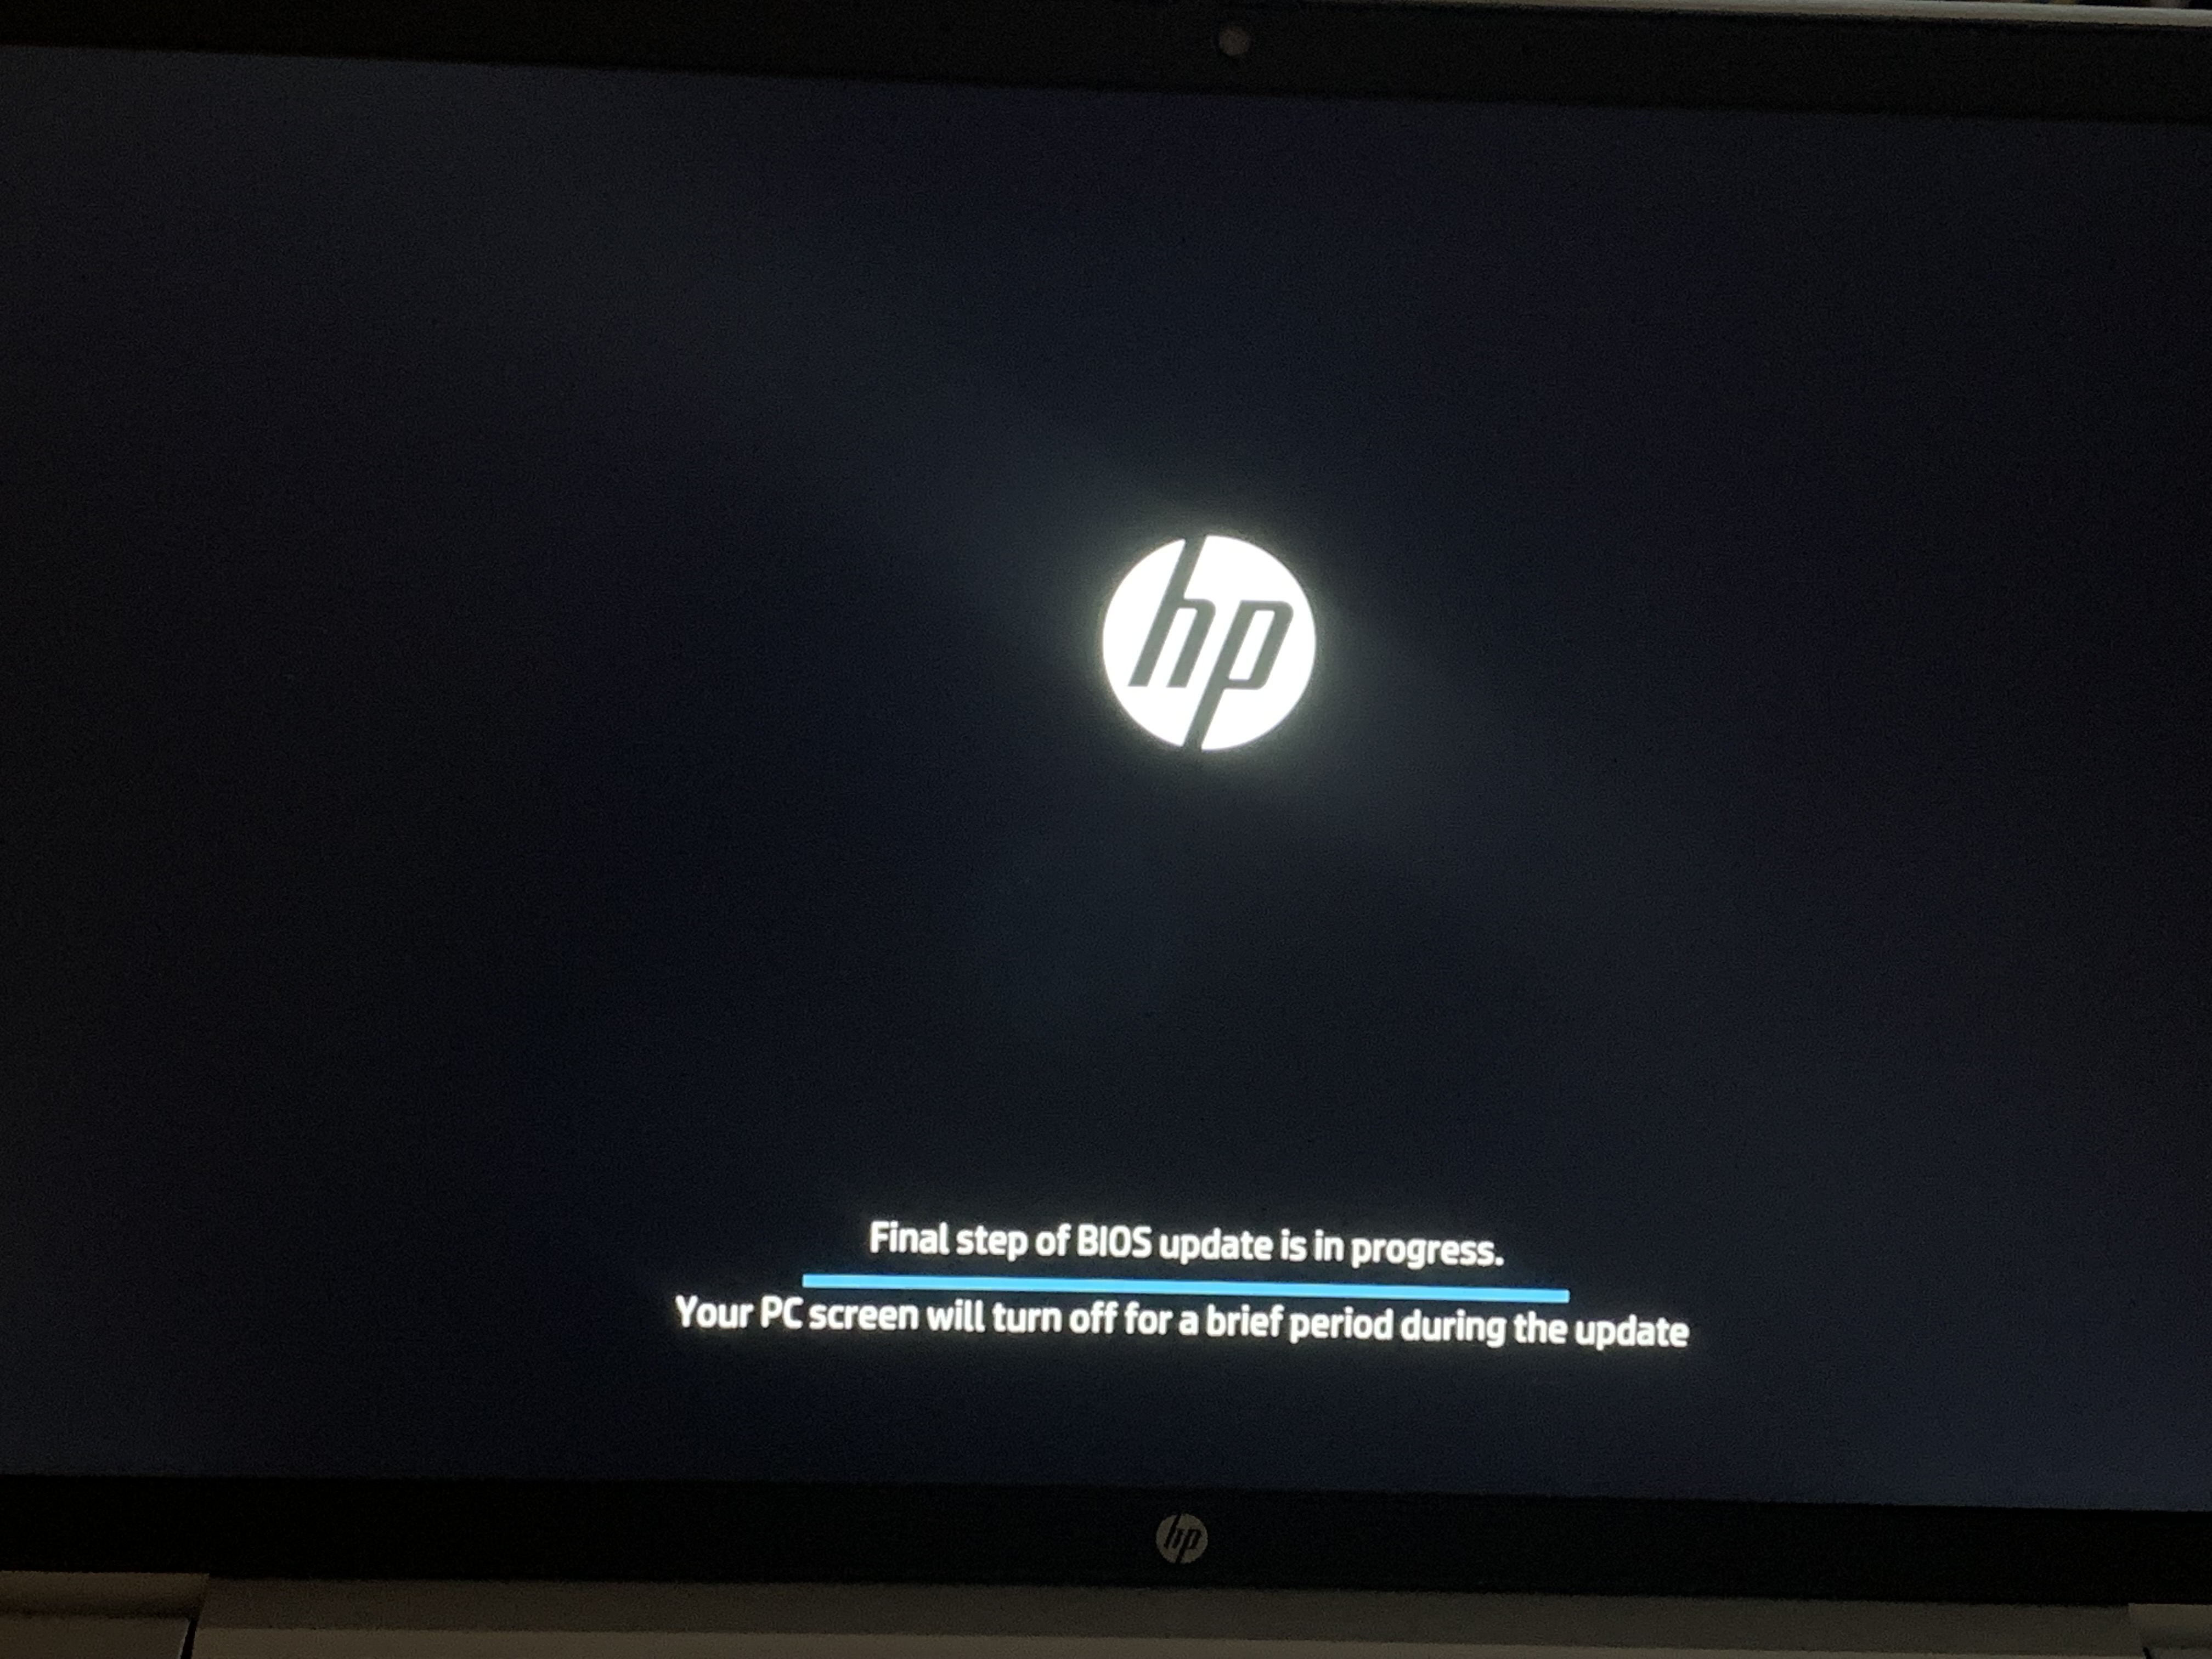 Firmware Update stuck at 100% - HP Support Community - 8145743